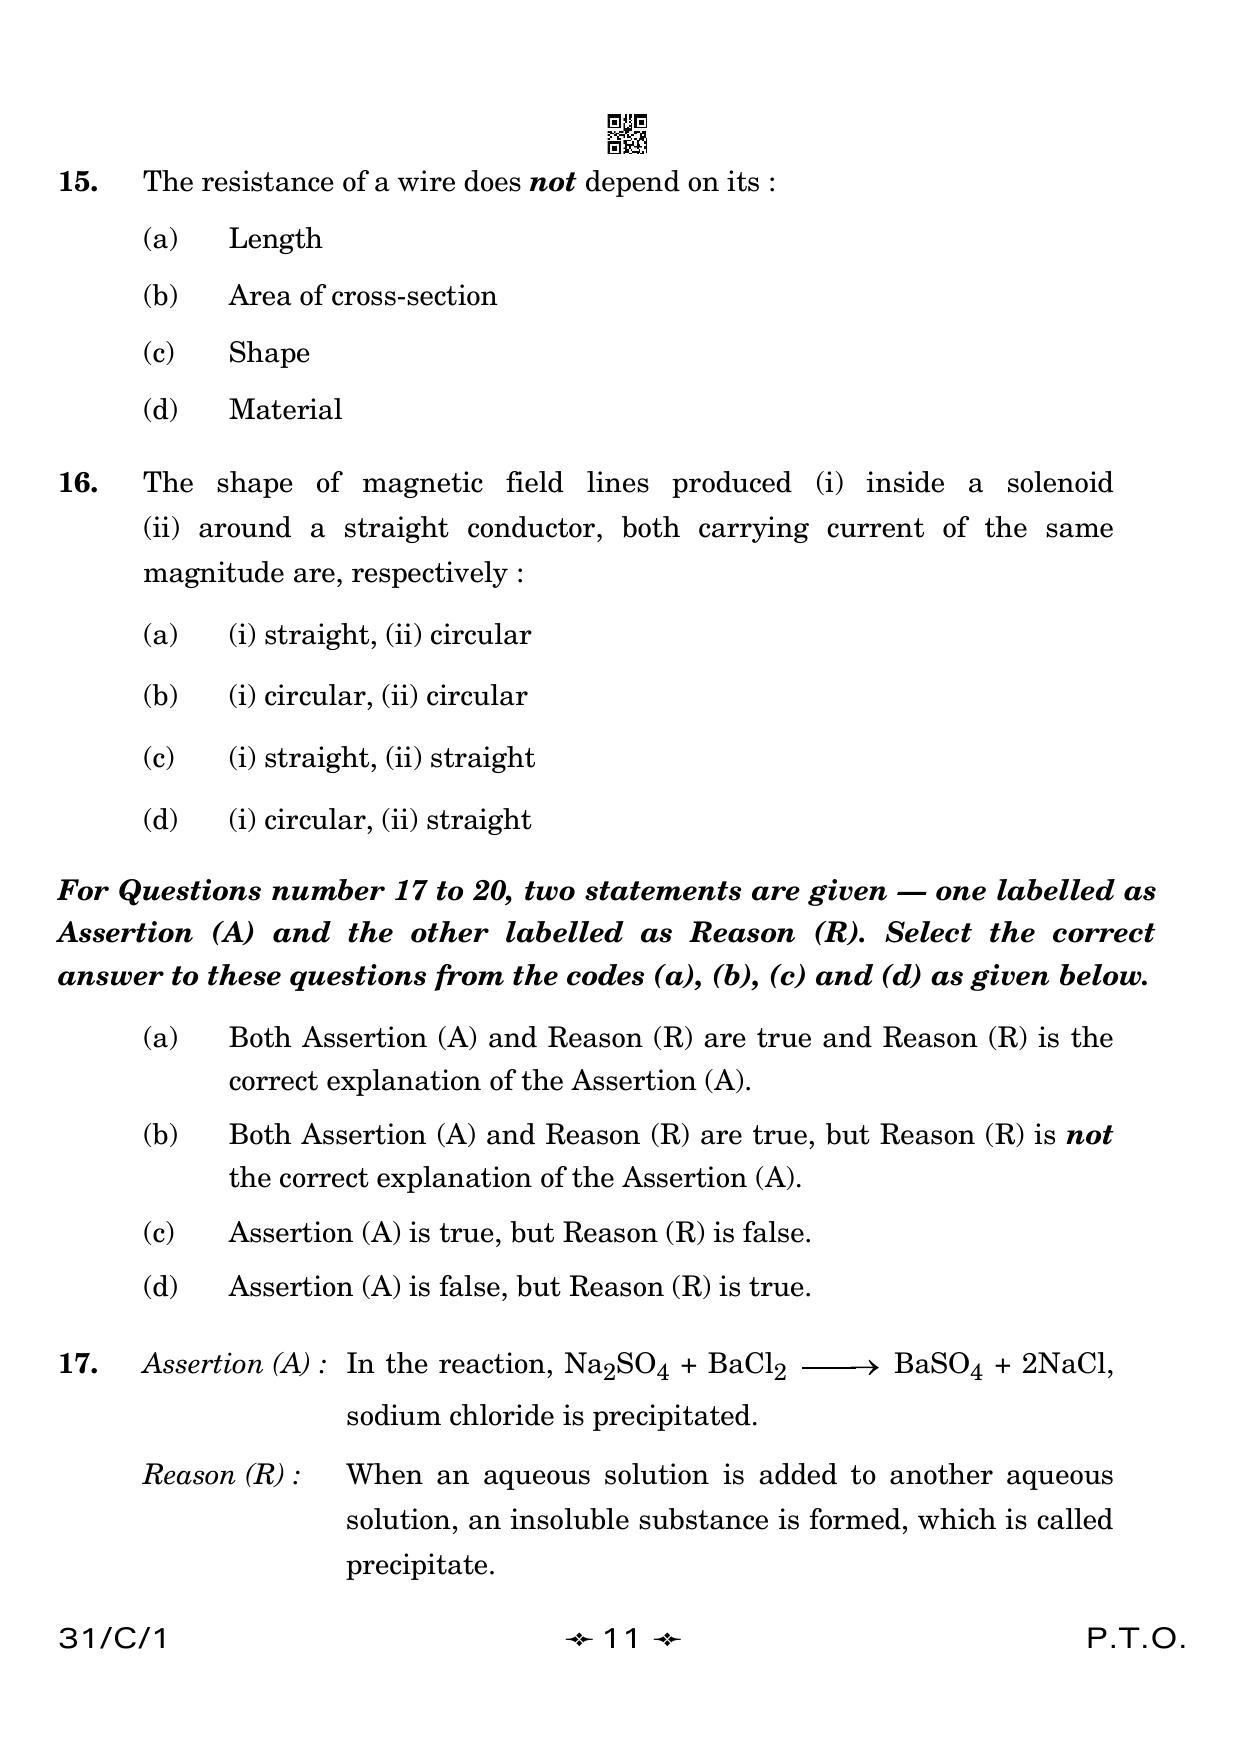 CBSE Class 10 31-1 Science 2023 (Compartment) Question Paper - Page 11